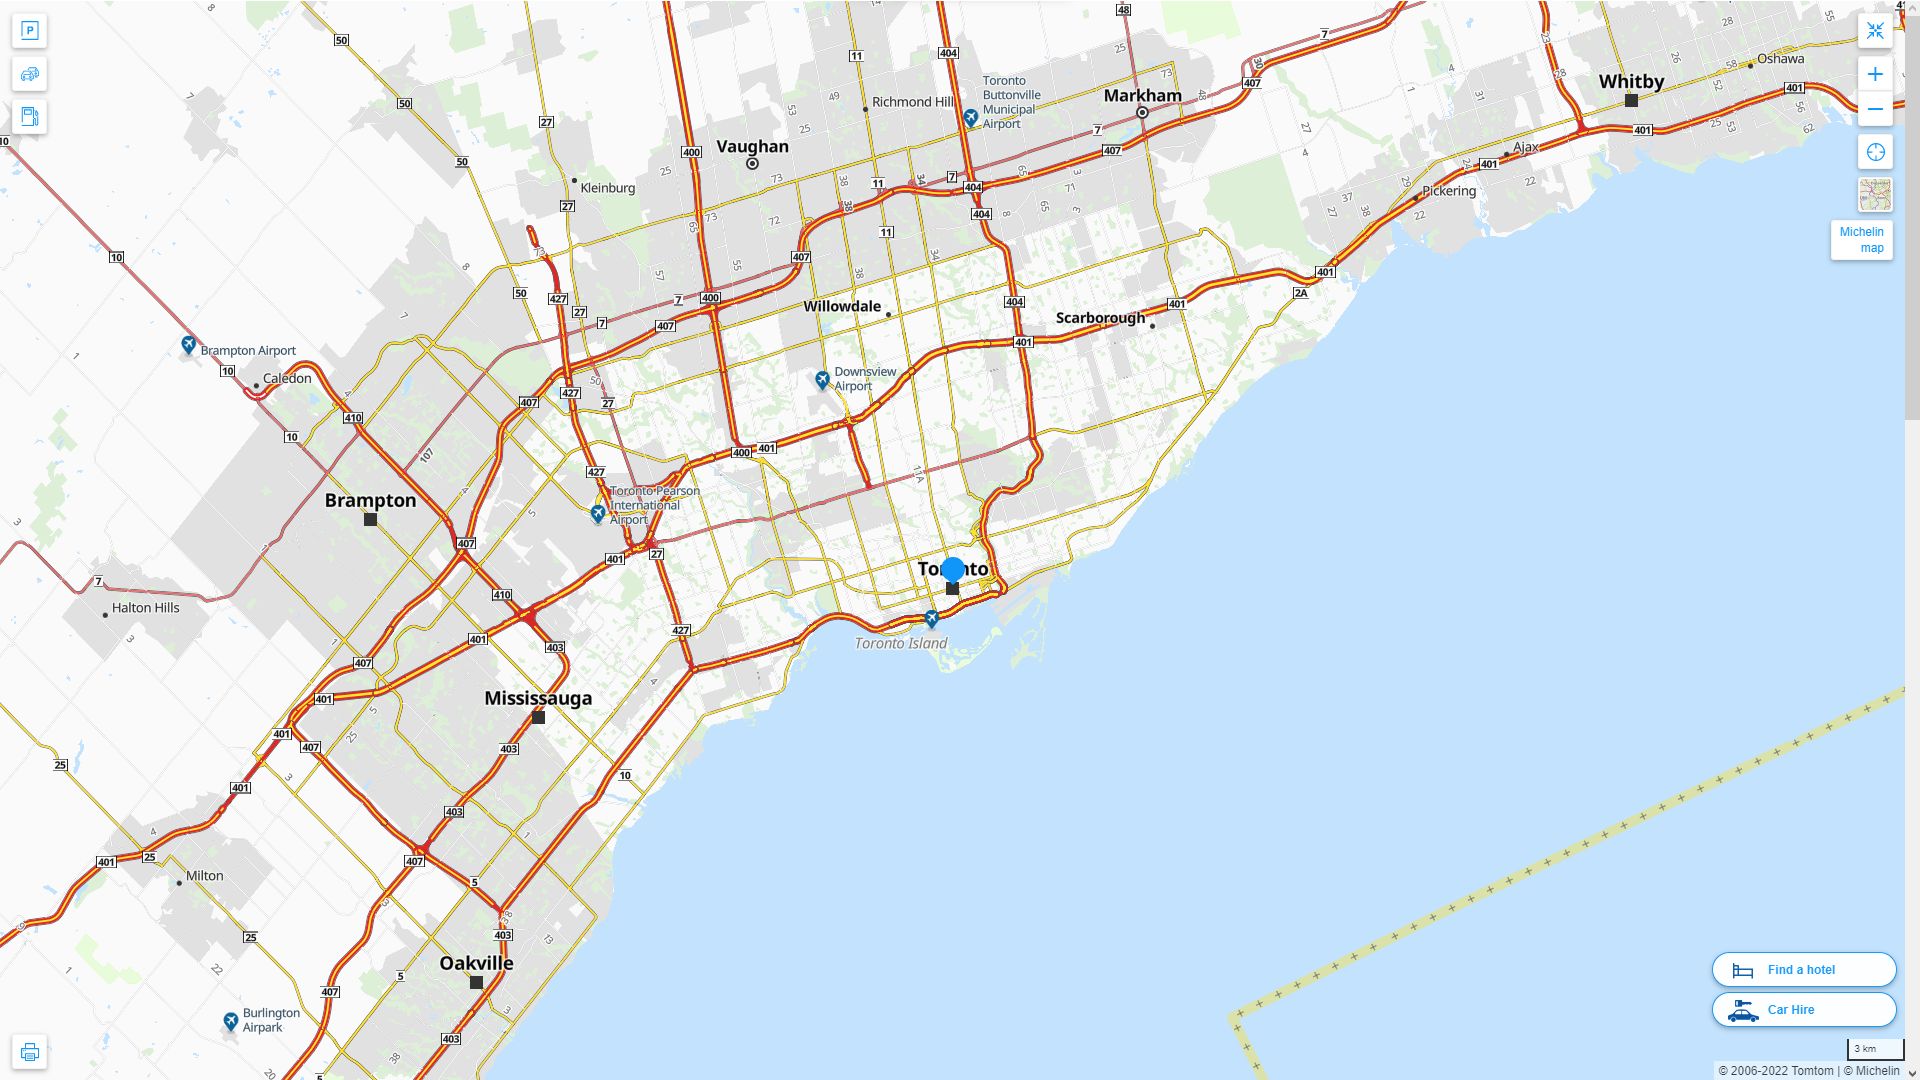 Toronto Highway and Road Map